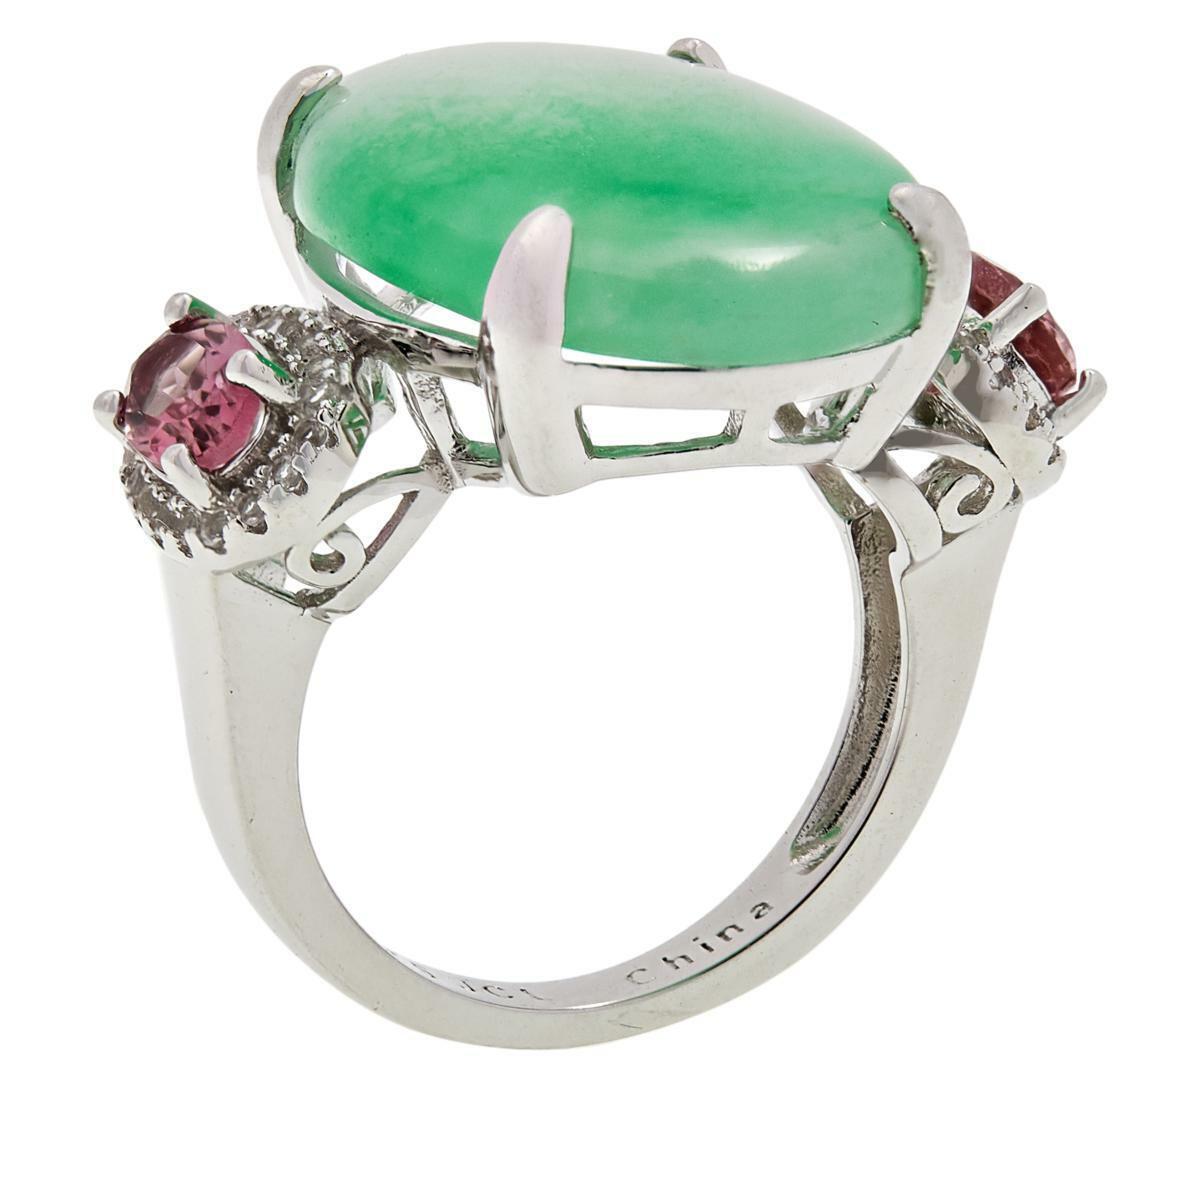 Colleen Lopez Sterling Silver Jade, Pink Tourmaline & White Topaz Ring, Size 7